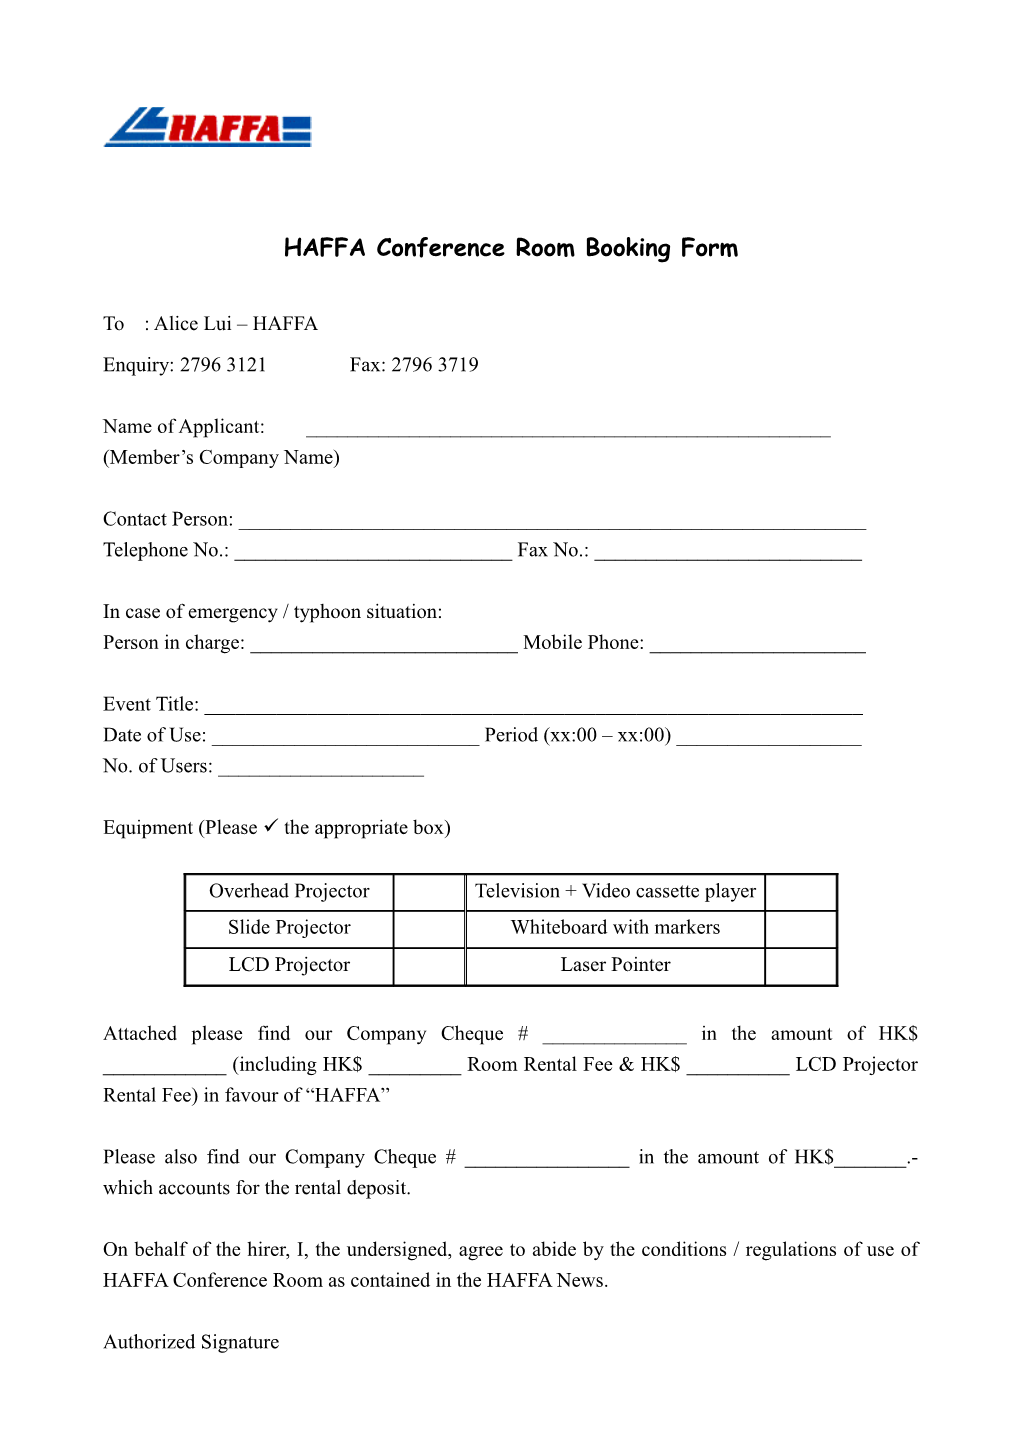 HAFFA Conference Room Booking Form